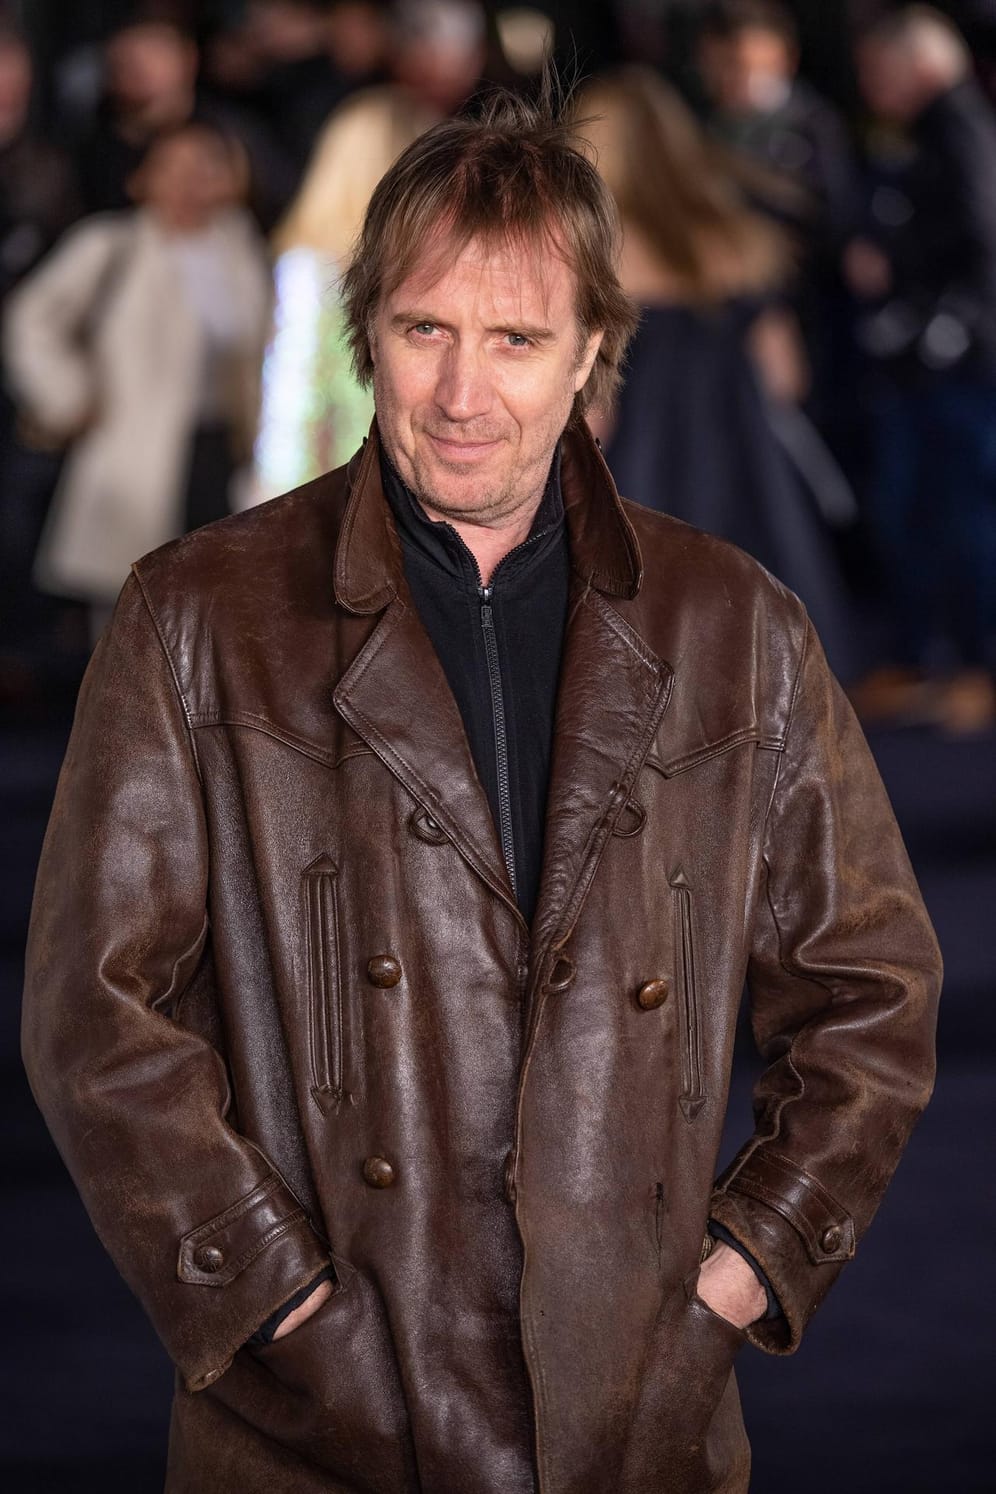 Welsh actor Rhys Ifans attends the London Premiere of The White Crow at Curzon Mayfair in London M